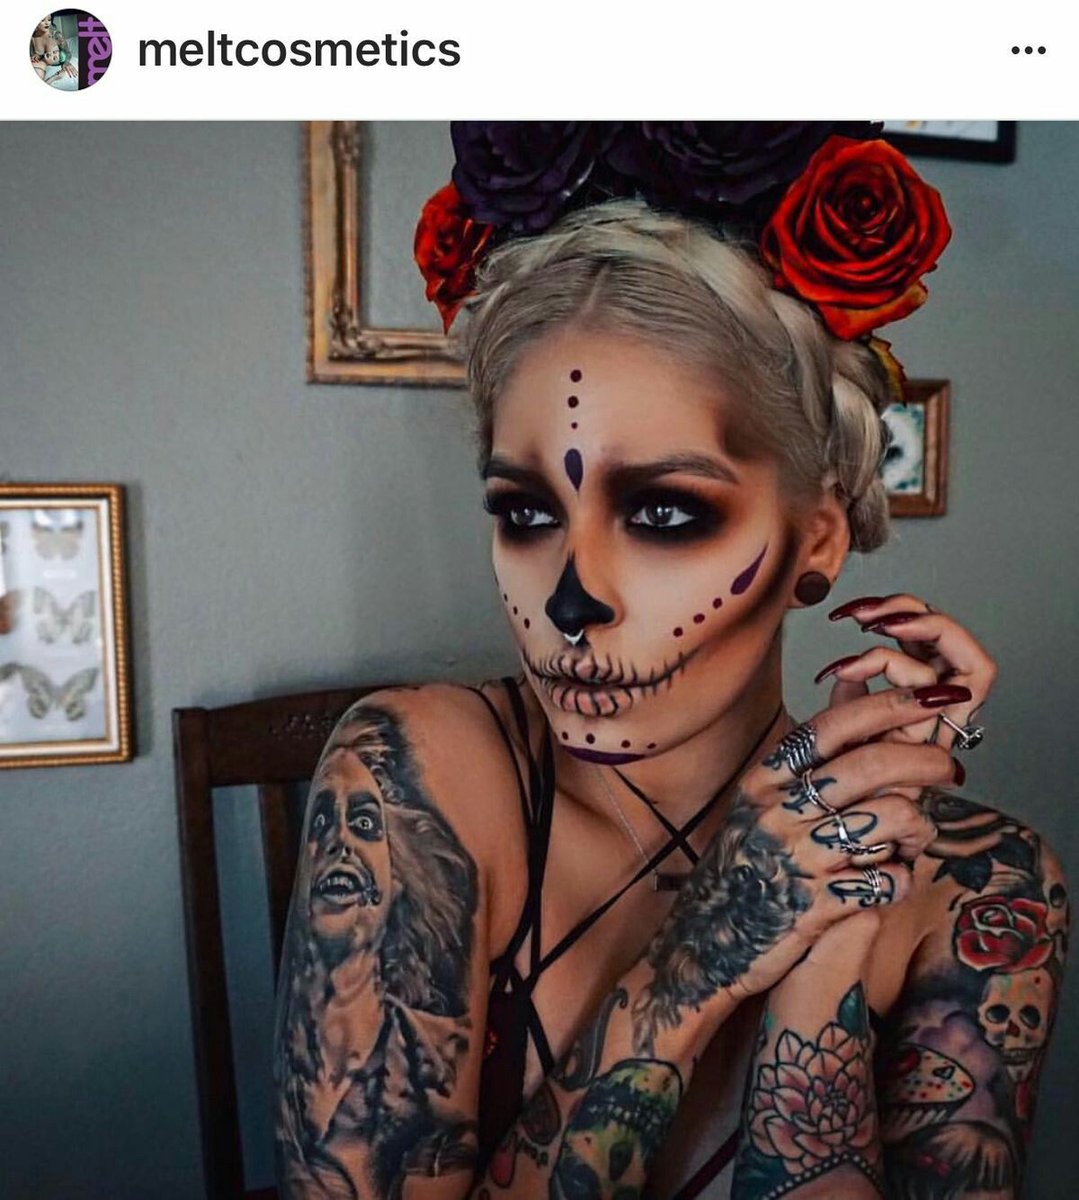 ....a little late... but oh my goodness 😮 How AMAZING is this Halloween make up!!

#whatcouldiweartoday #Halloween #styleinspiration #foroccasions #styleblogger #fashionblogger #fun #artistic #scary #faceart #art #facepaint